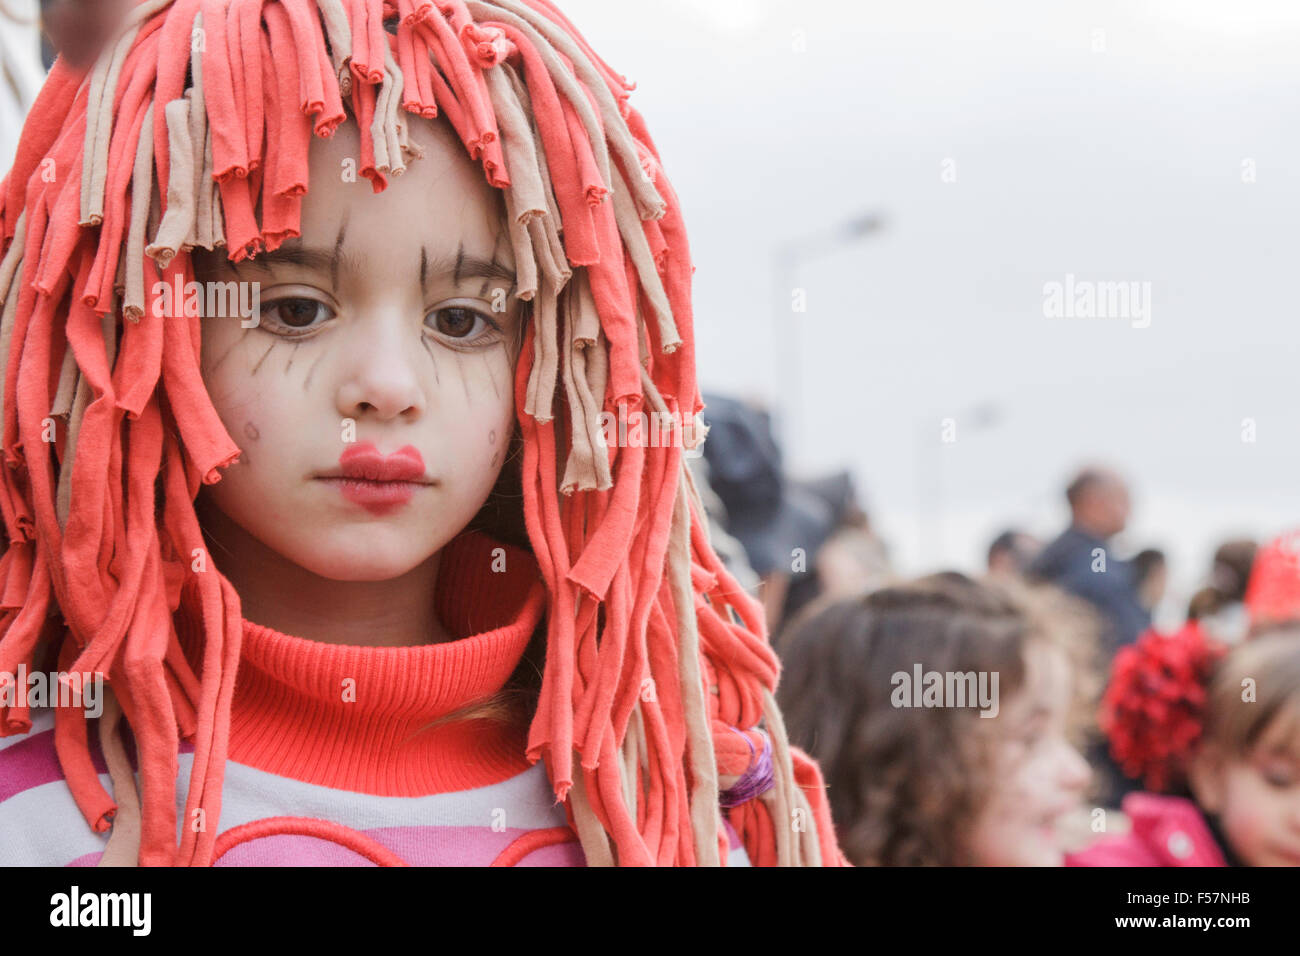 Portrait of the beautiful face of a young girl in a red and beige, fabric, tassled wig with make-up - Mealhada Carnaval/ Carnival street parade Stock Photo